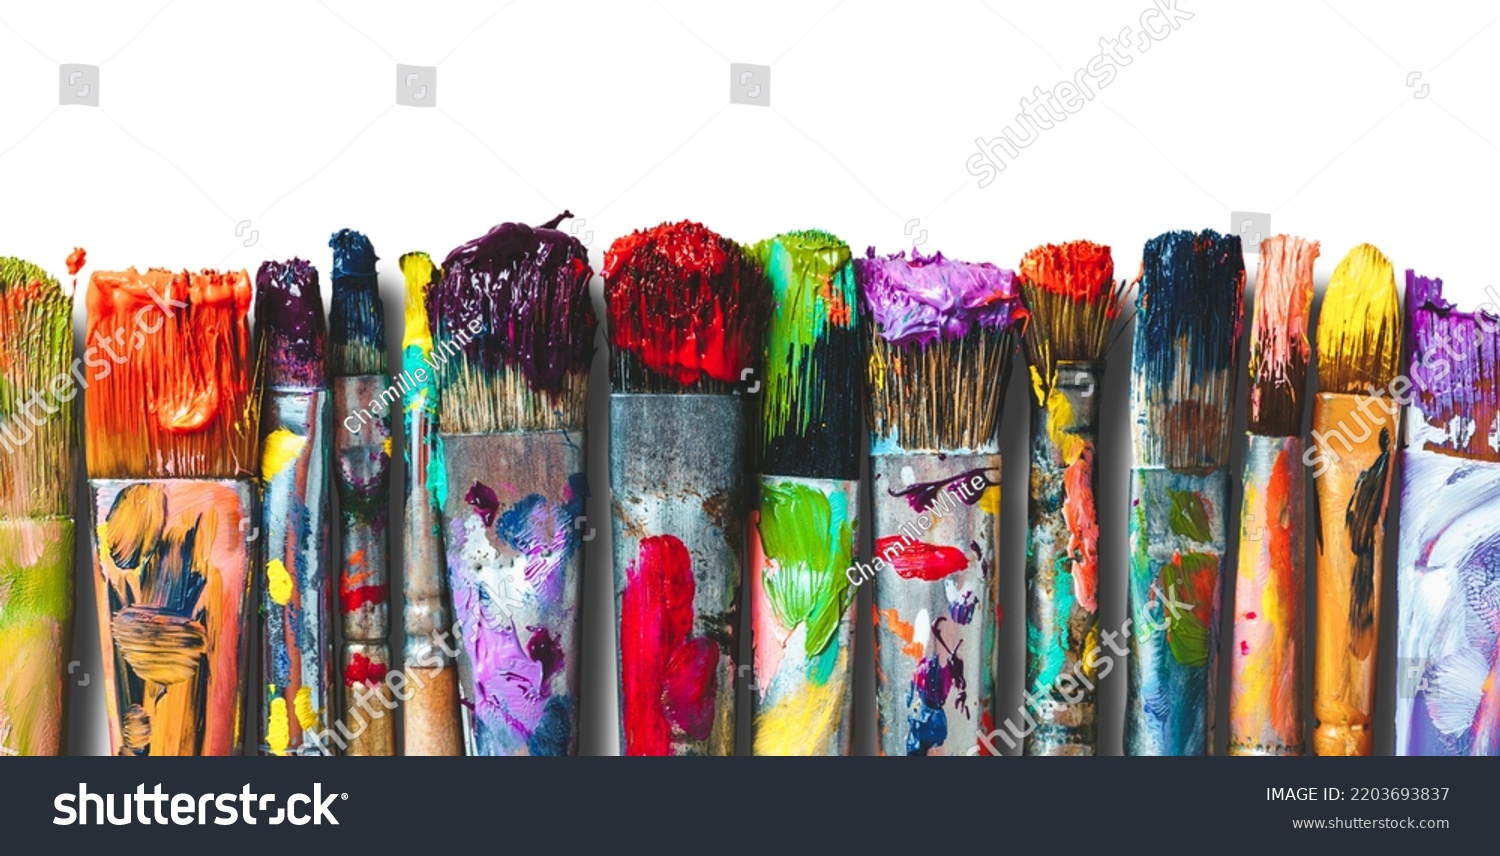 Row of artist paintbrushes closeup on white. Artistic brushes smeared with paints on white background. #2203693837